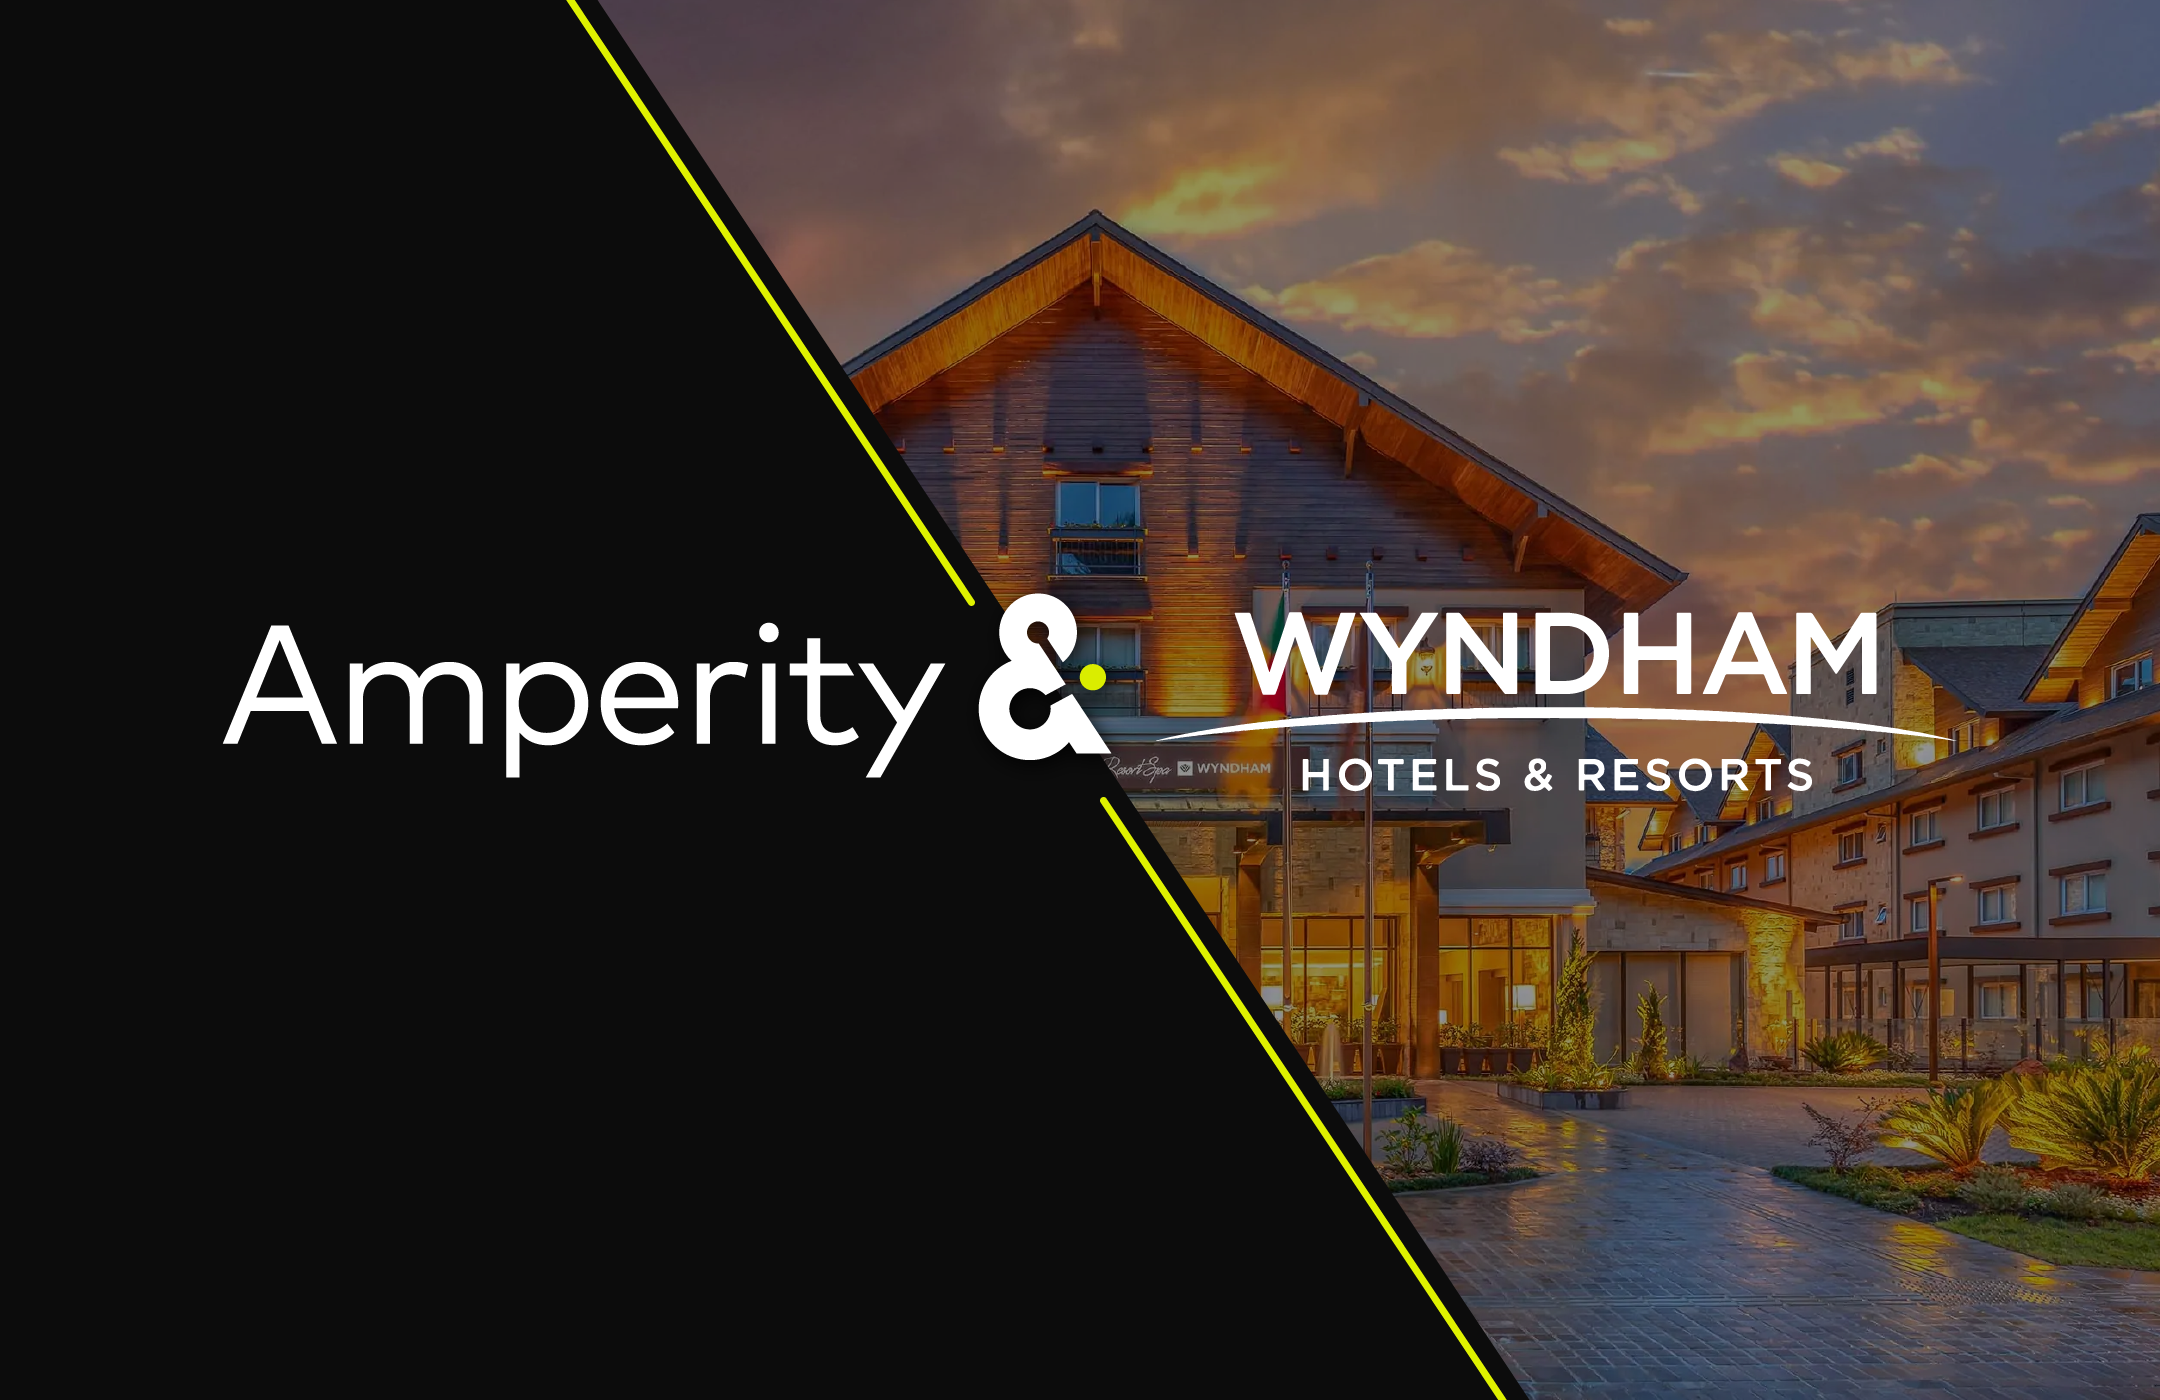 Image displaying hotel with words: Amperity & WYNDHAM Hotels & Resorts. 